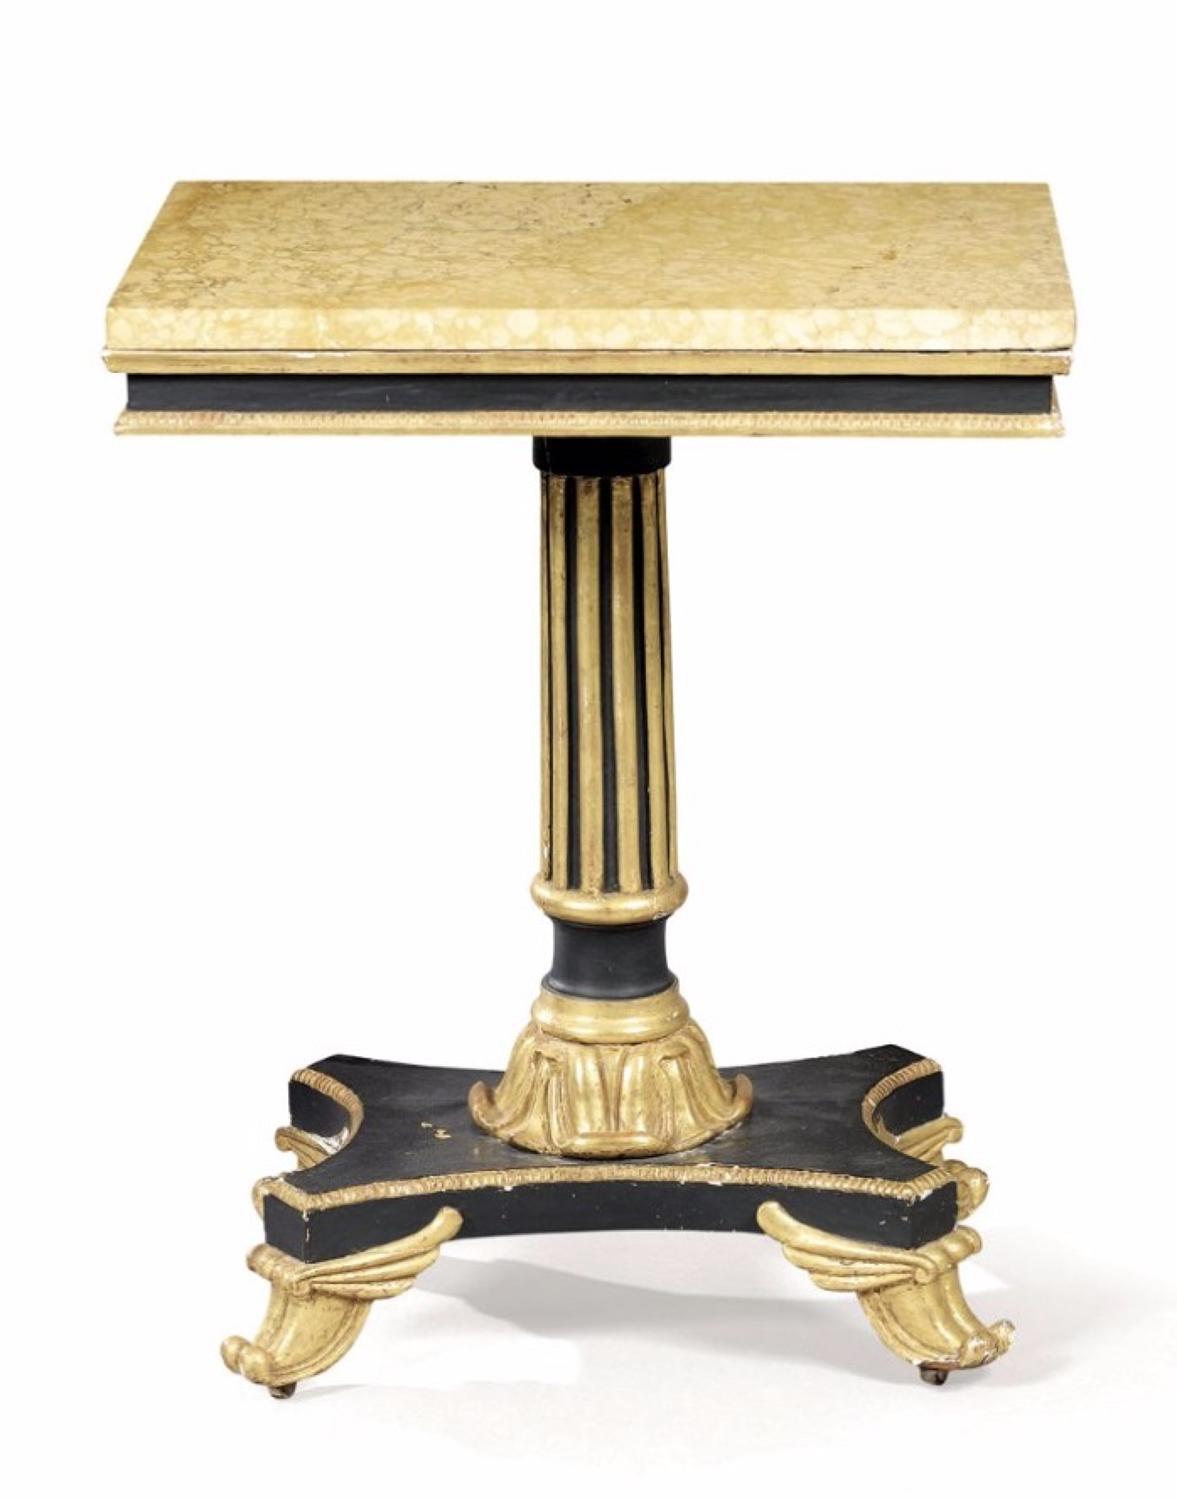 AN ENGLISH REGENCY PERIOD OCCASIONAL TABLE